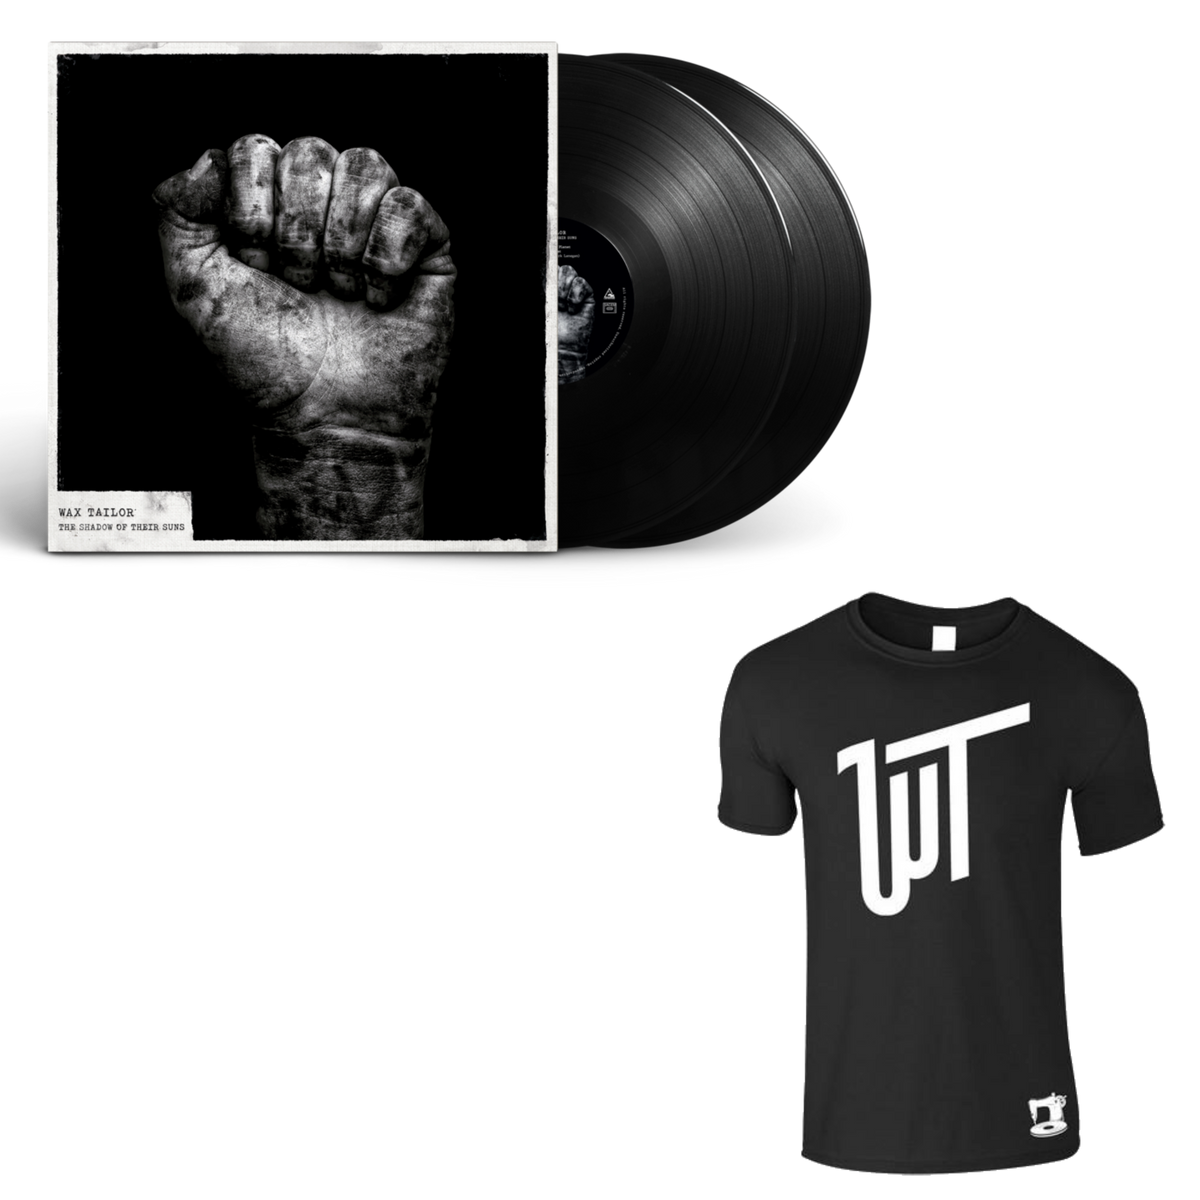 Pack The Shadow Of Their Suns 2LP + T-shirt "WT" Noir Homme